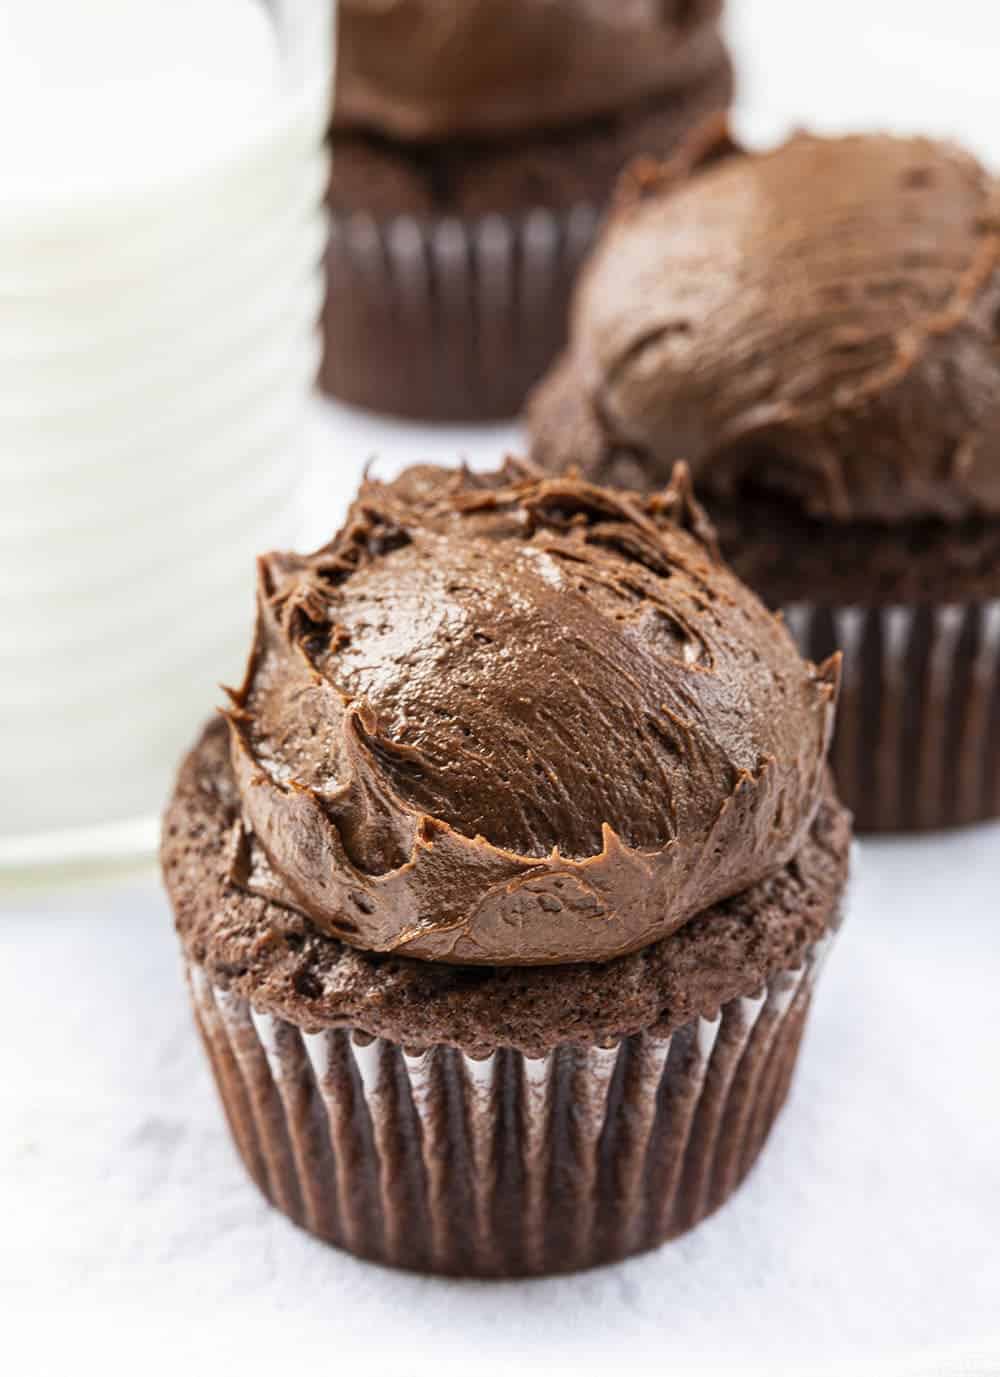 Chocolate Brownie Cupcakes with Rounded Frosting on Top